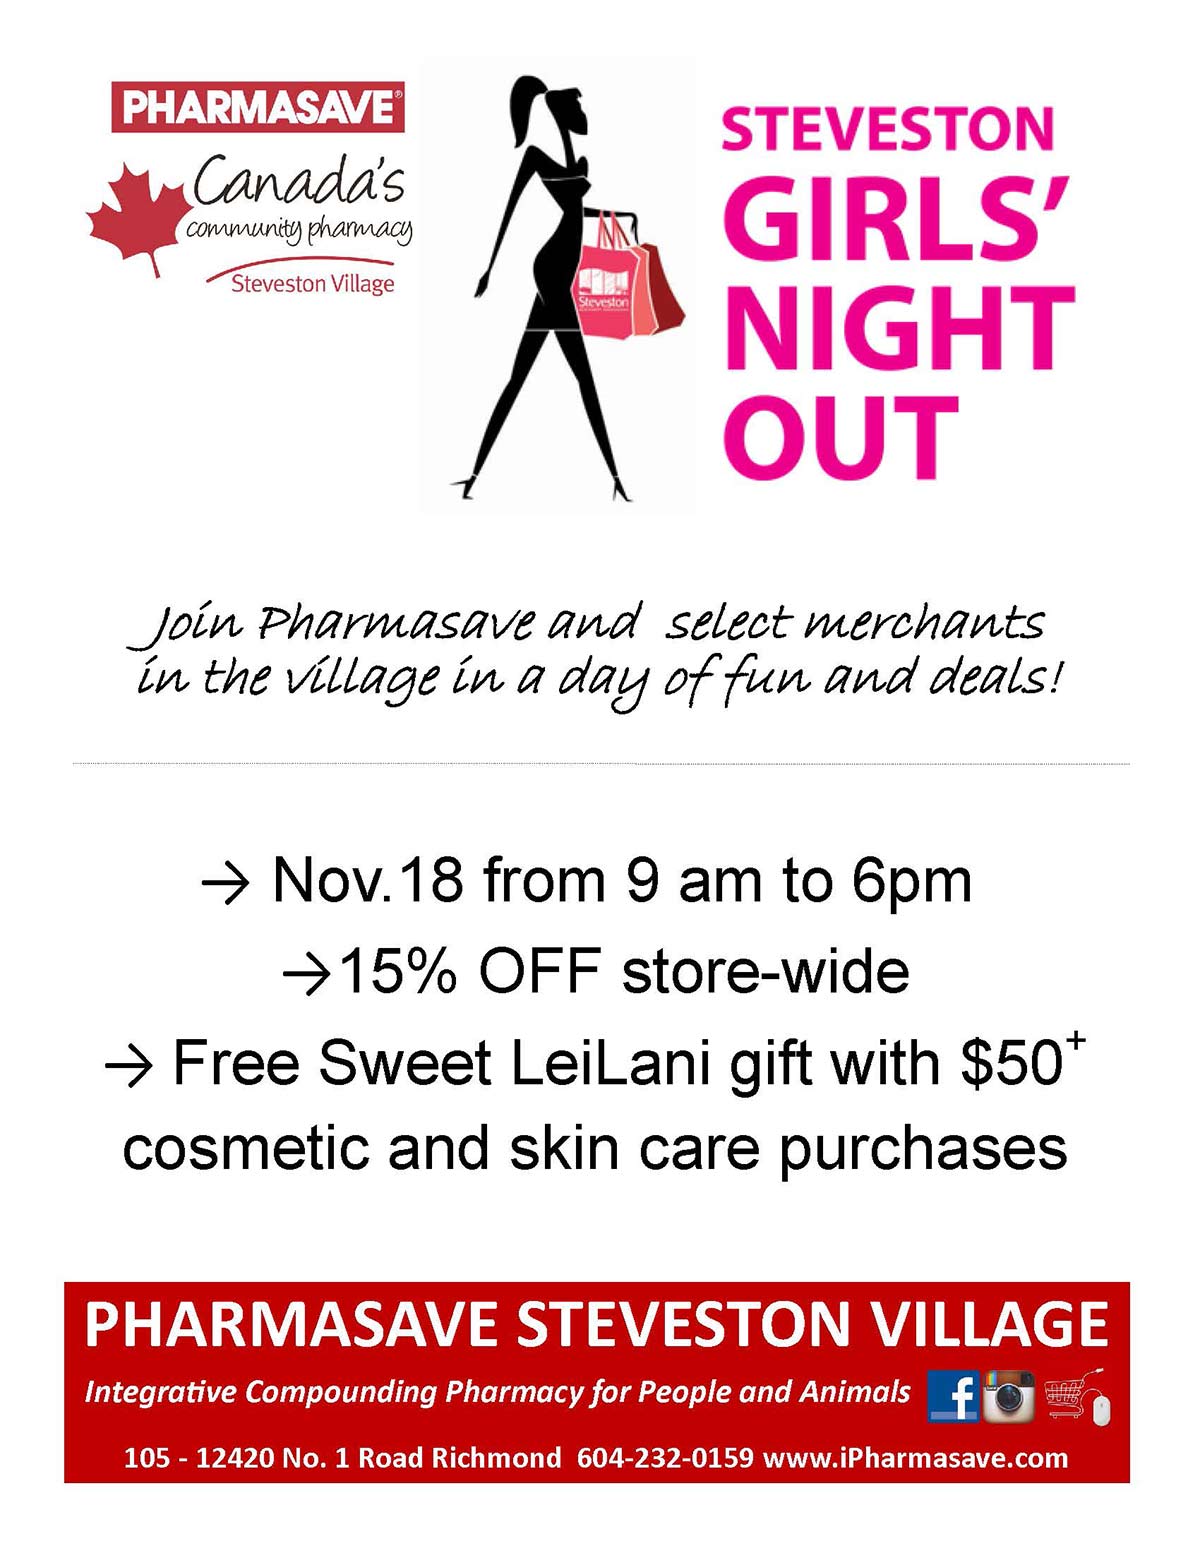 Steveston Girls' Night Out. Join Pharmasave and select merchants in the village in a day of fun and deals. Nov 18 9am-6am.